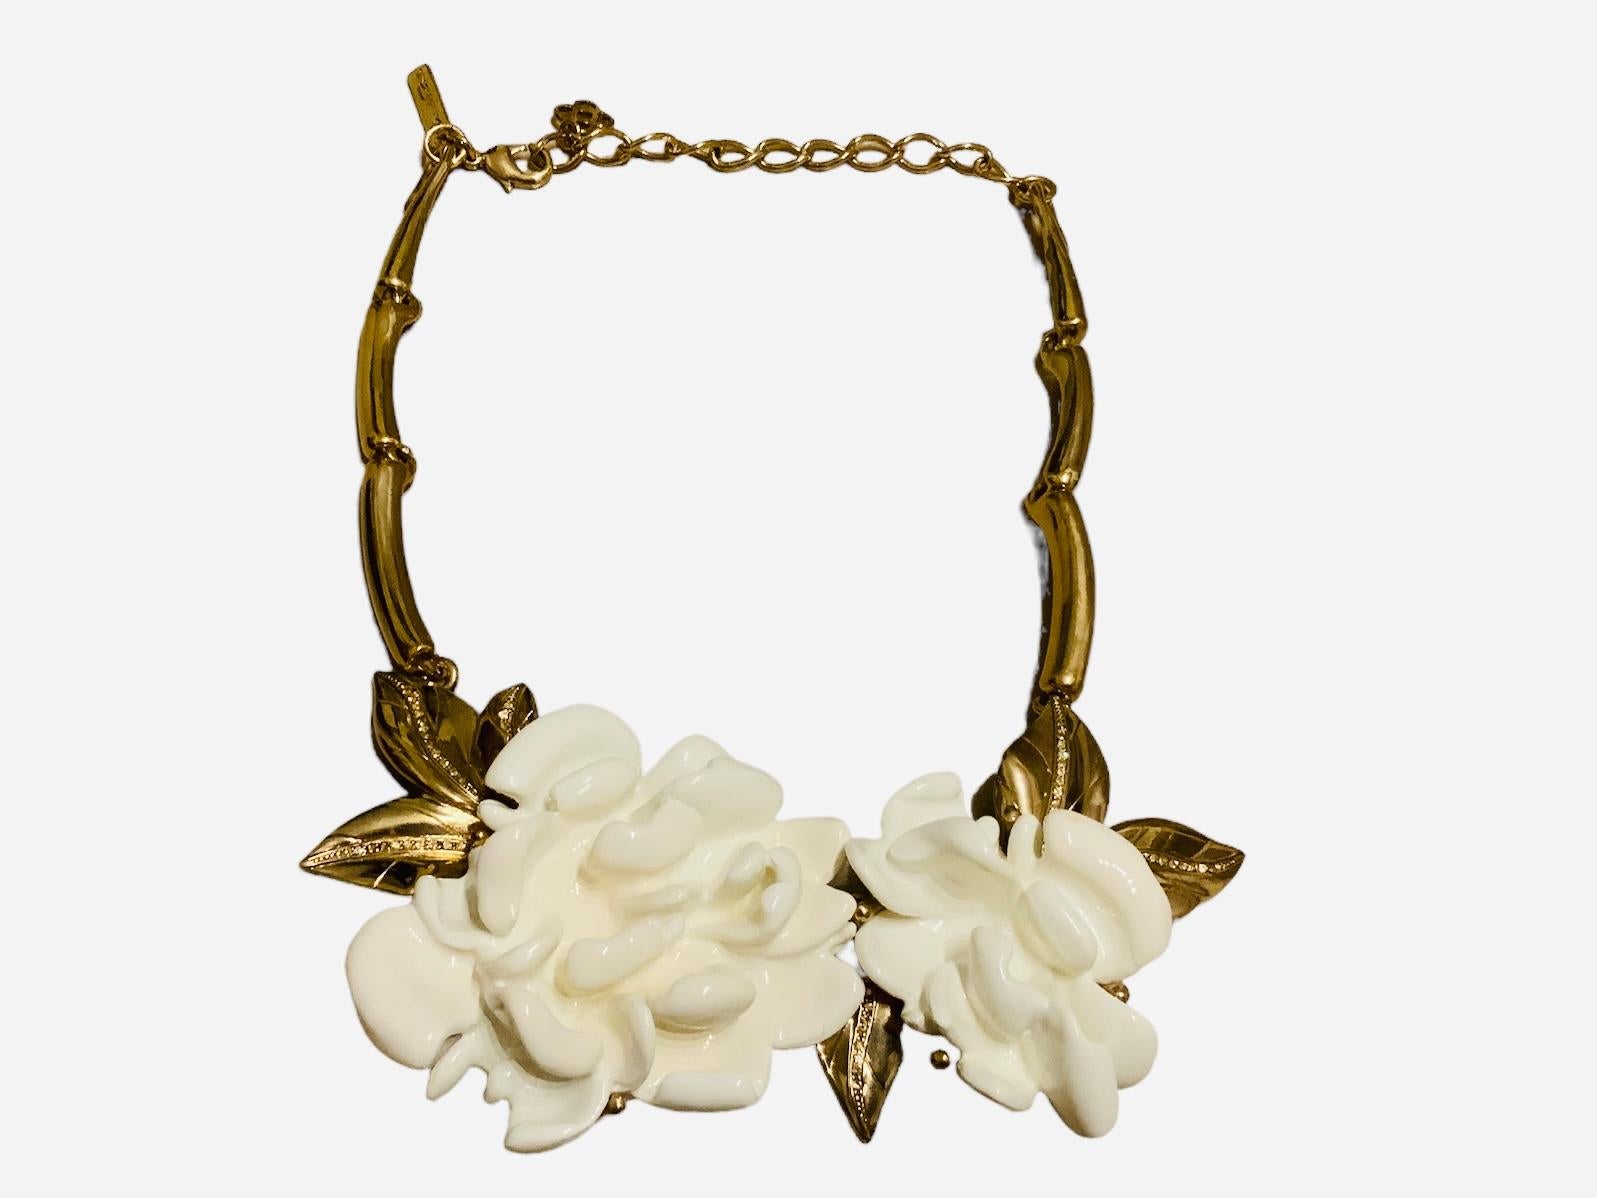 Oscar De La Renta Gold Plated Camellia Flowers Necklace In Good Condition For Sale In Guaynabo, PR